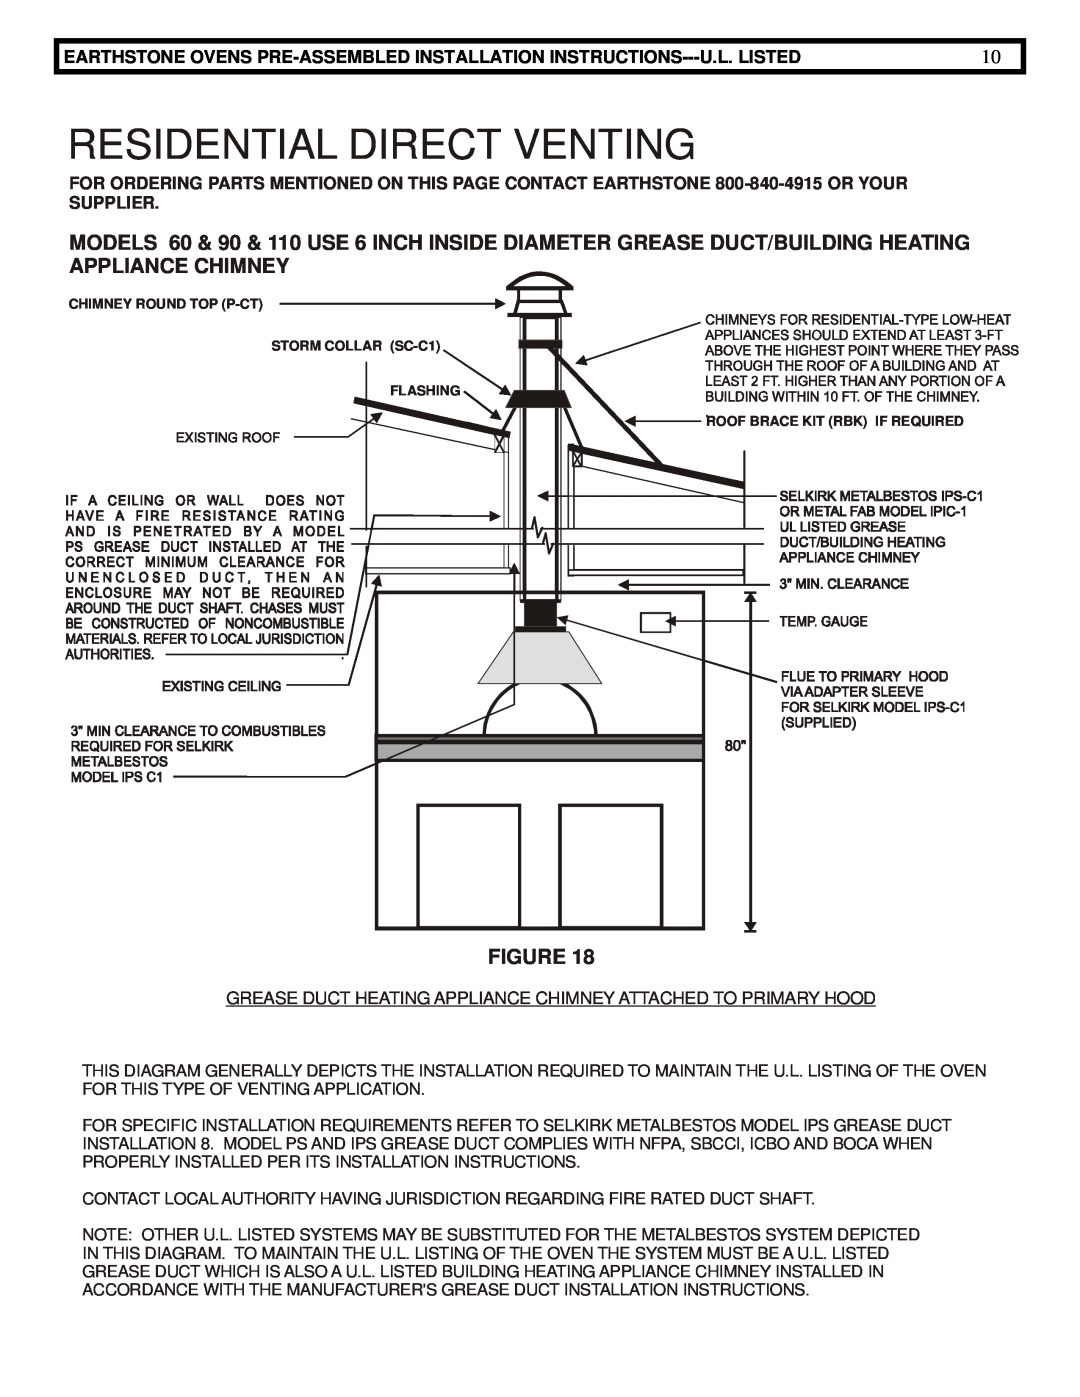 EarthStone woofire oven installation instructions Residential Direct Venting 